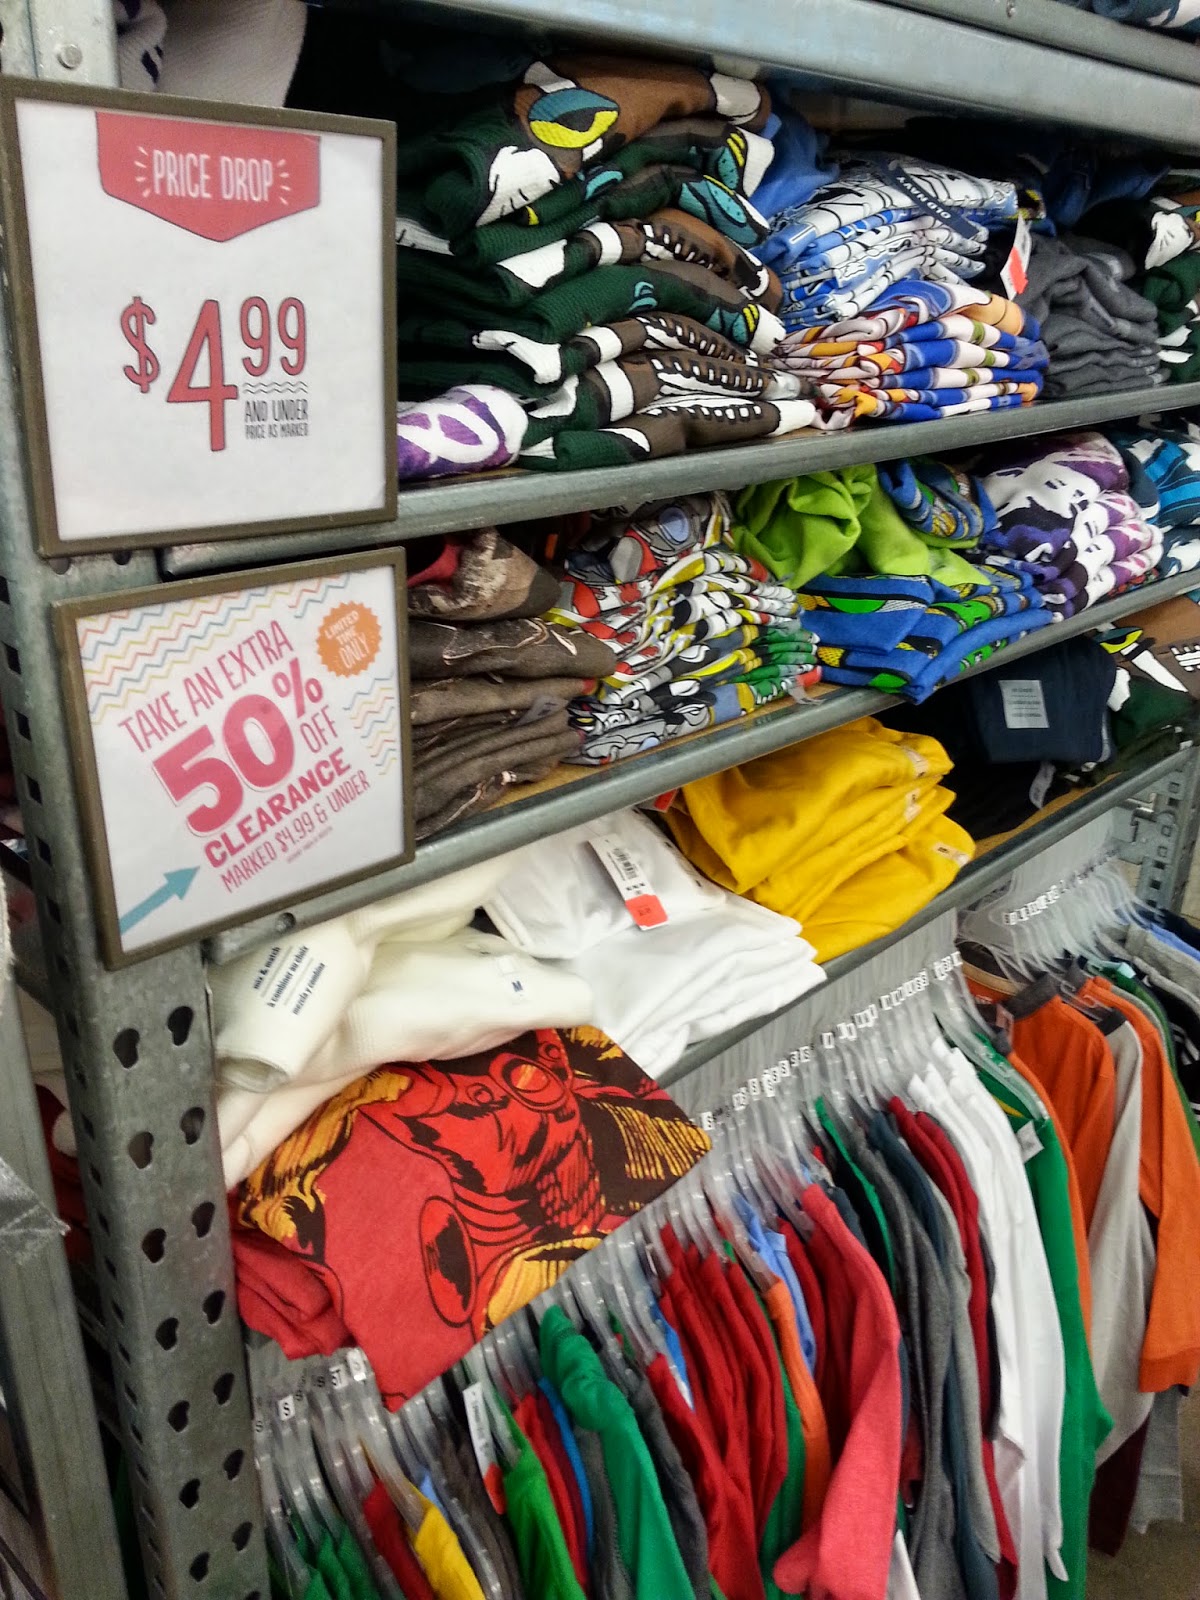 We also stopped into Old Navy this week and their clearance marked $4. ...